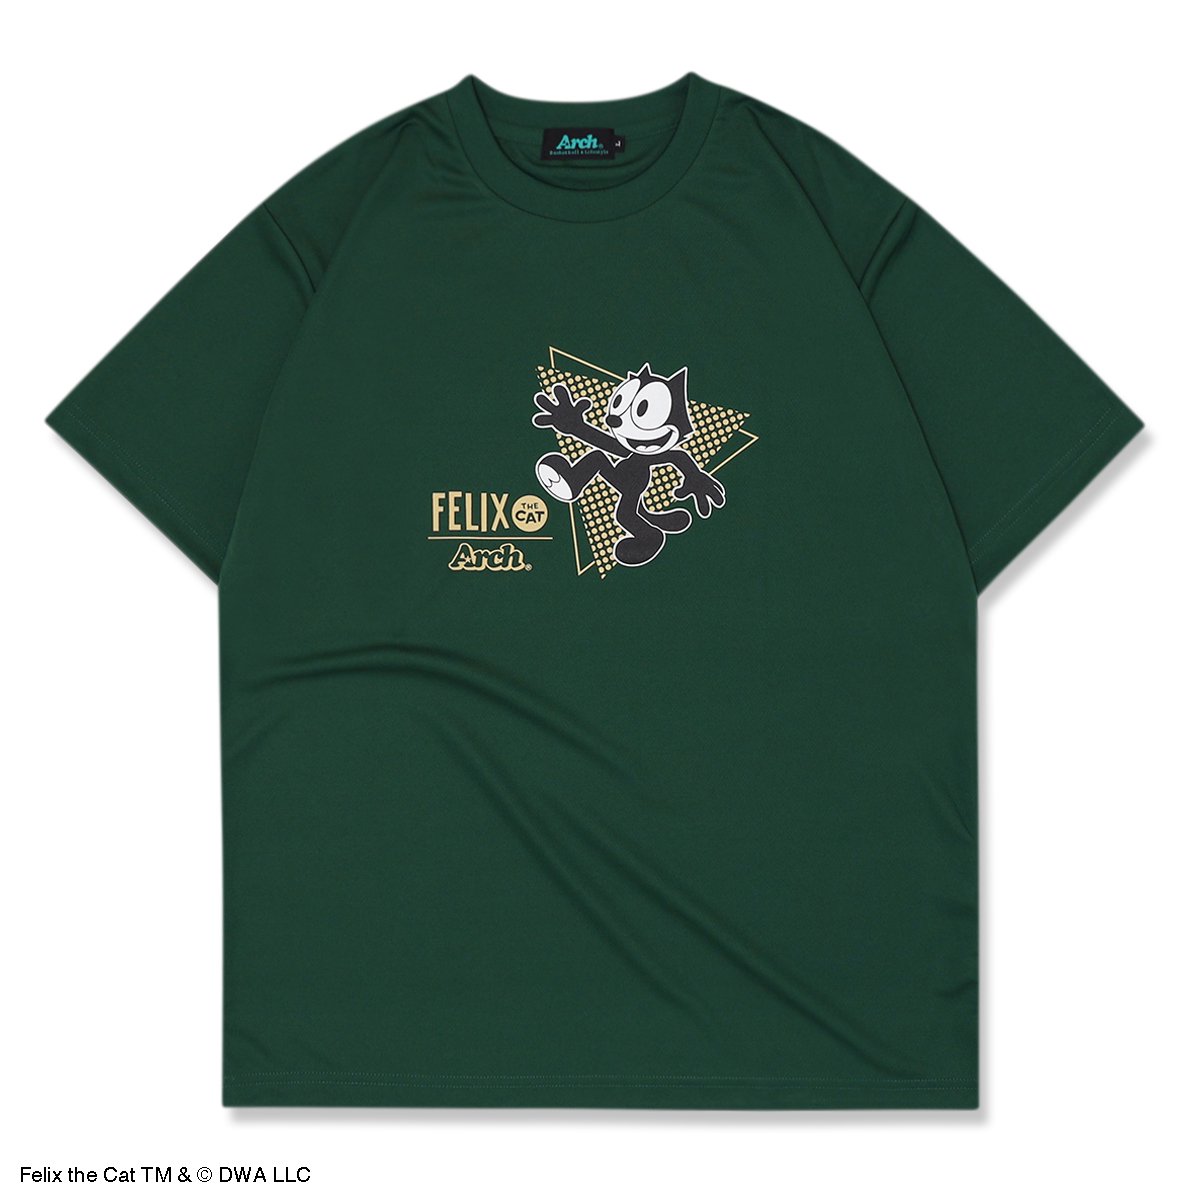 FELIX THE CAT | Arch bring happiness tee [DRY]【dark green】 - Arch ☆ アーチ  [バスケットボール＆ライフスタイルウェア Basketball&Lifestyle wear]